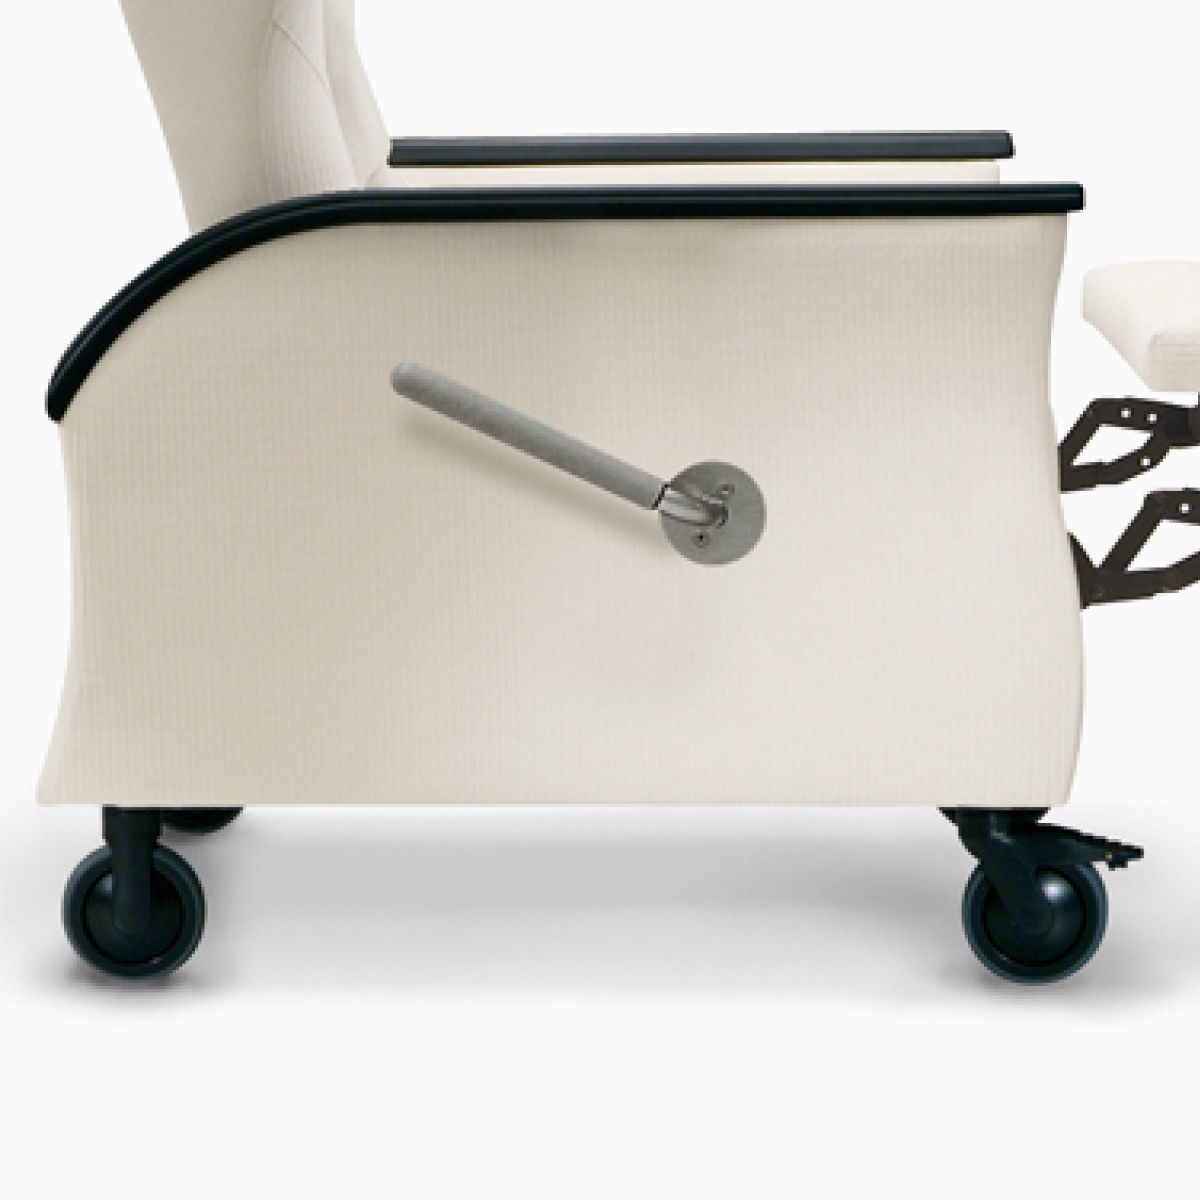 Close-up of a swiveling front caster with brake and a rear fixed caster on a Nemschoff Pristo Recliner.